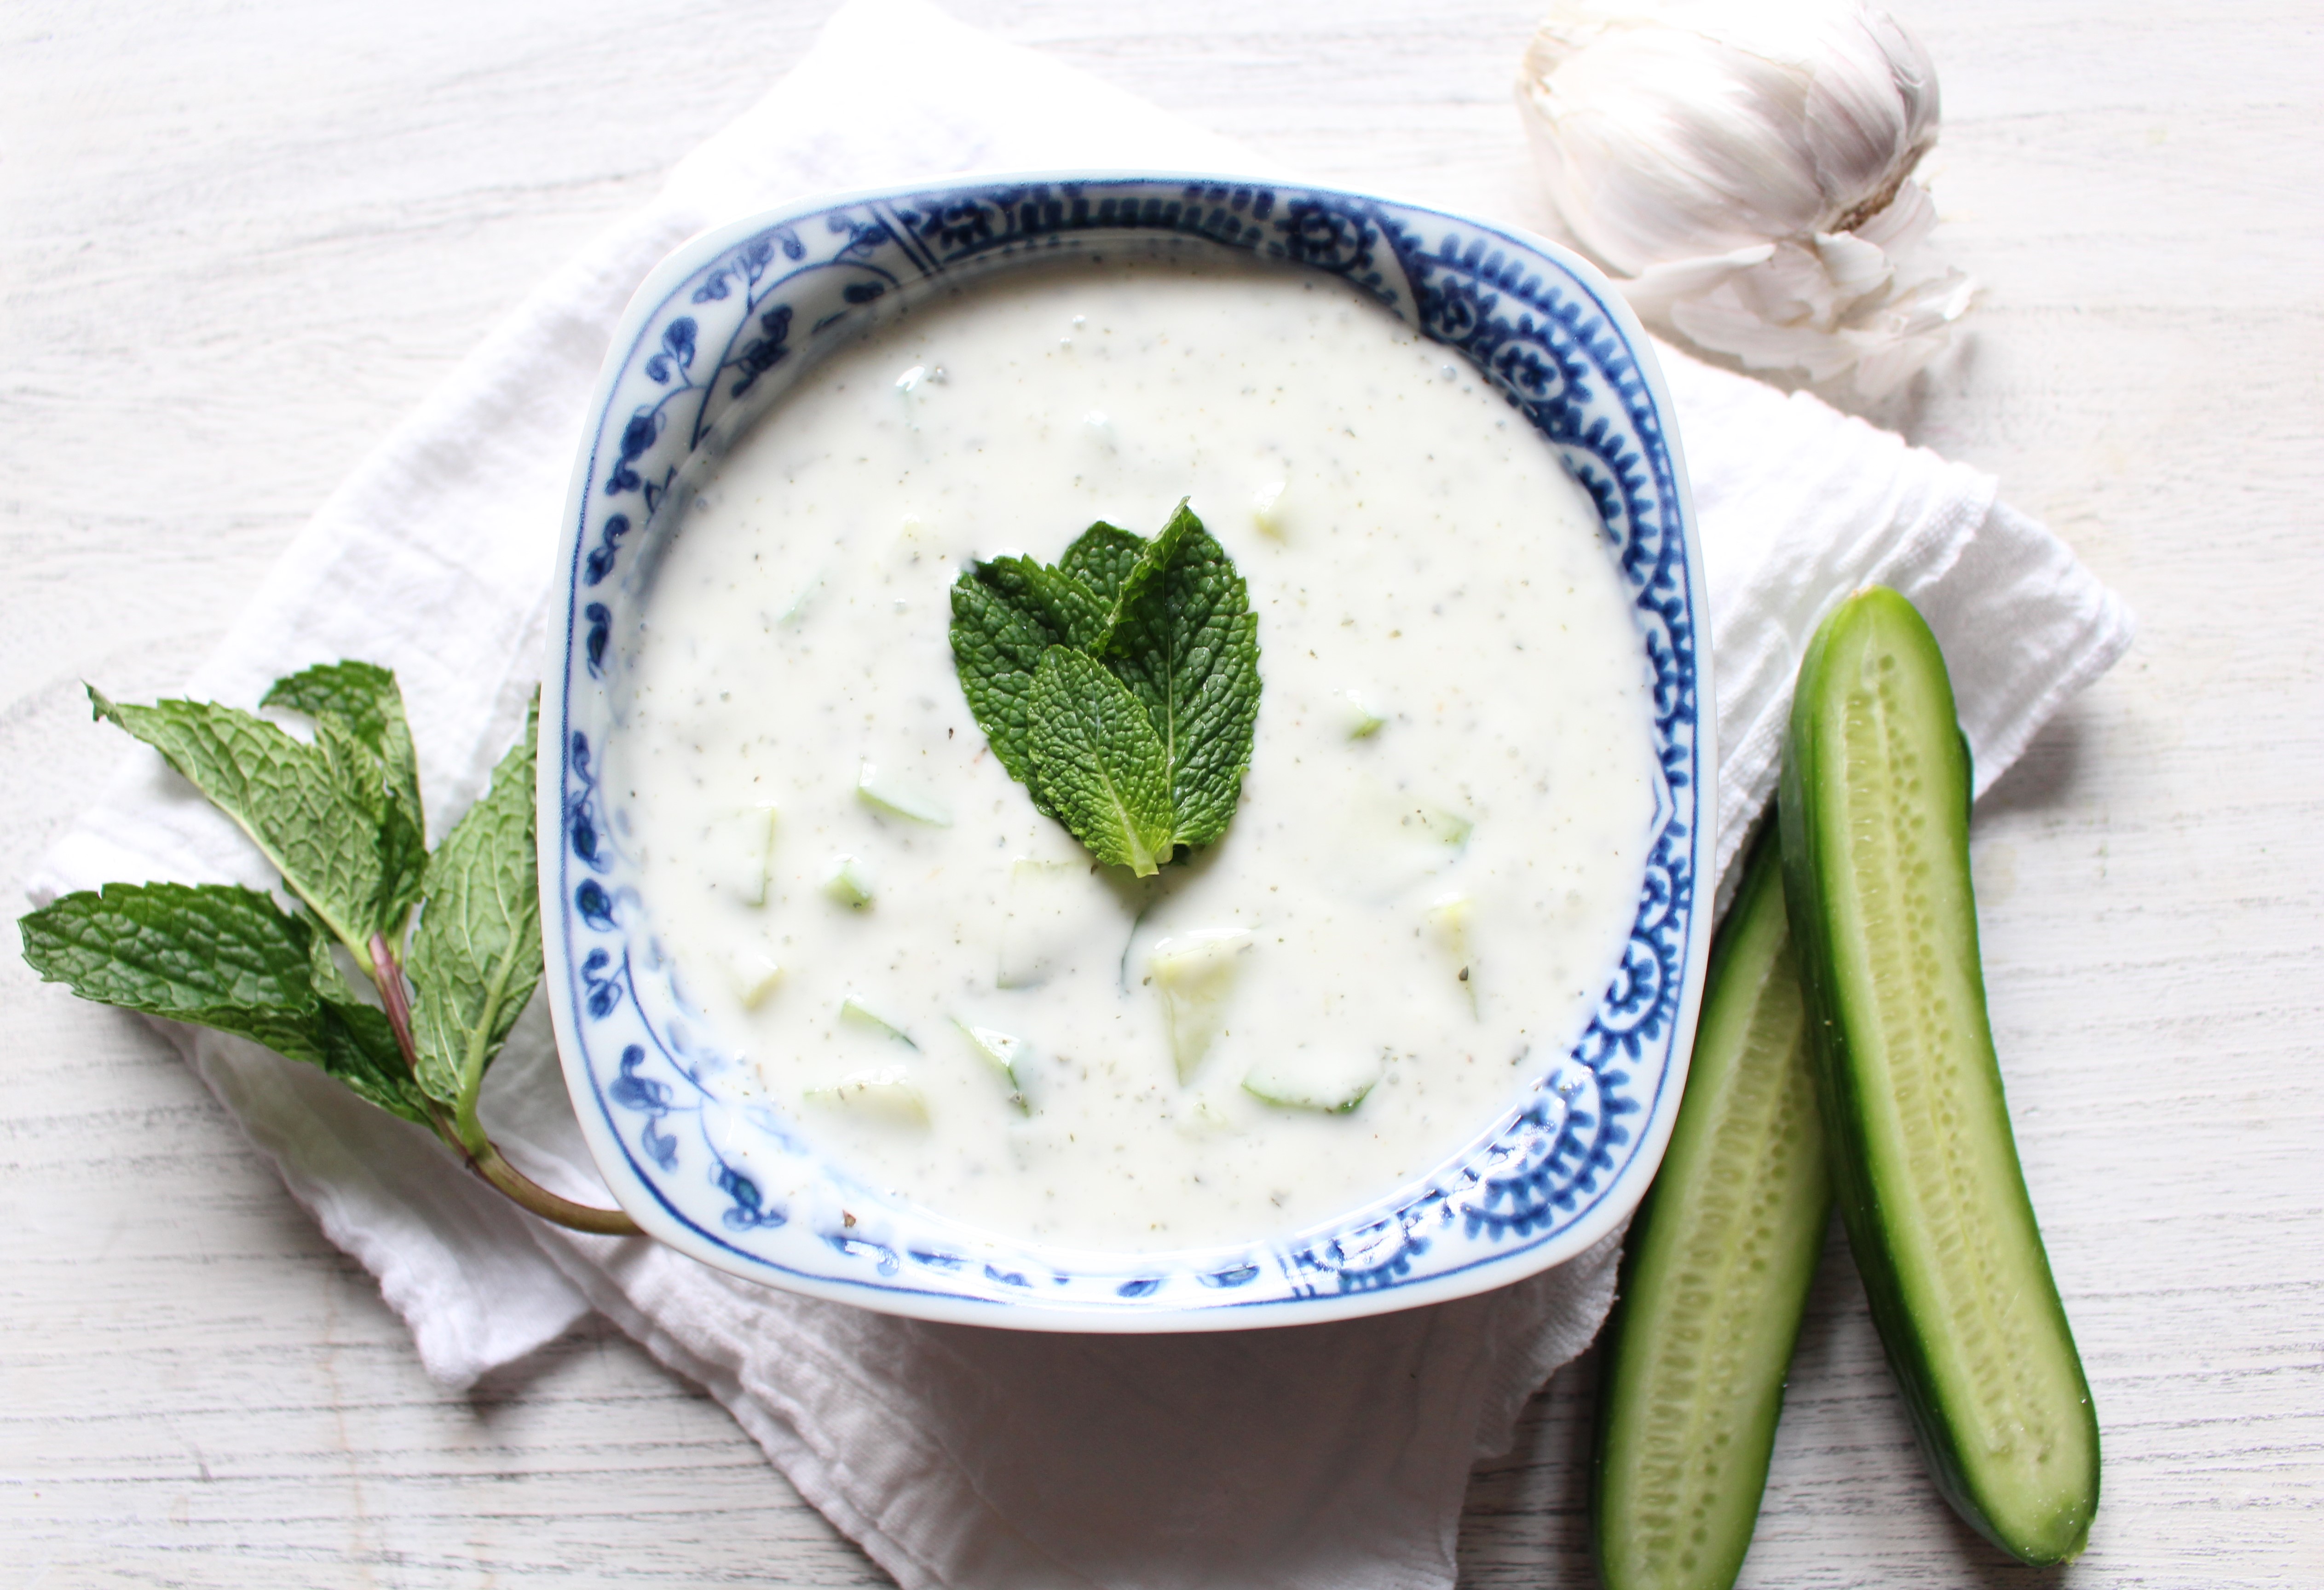 Cool and refreshing cucumber and mint yogurt sauce. The Middle Eastern version of tzatziki, this sauce is great on grilled veggies, meat, or fish or on lentils - or by itself!